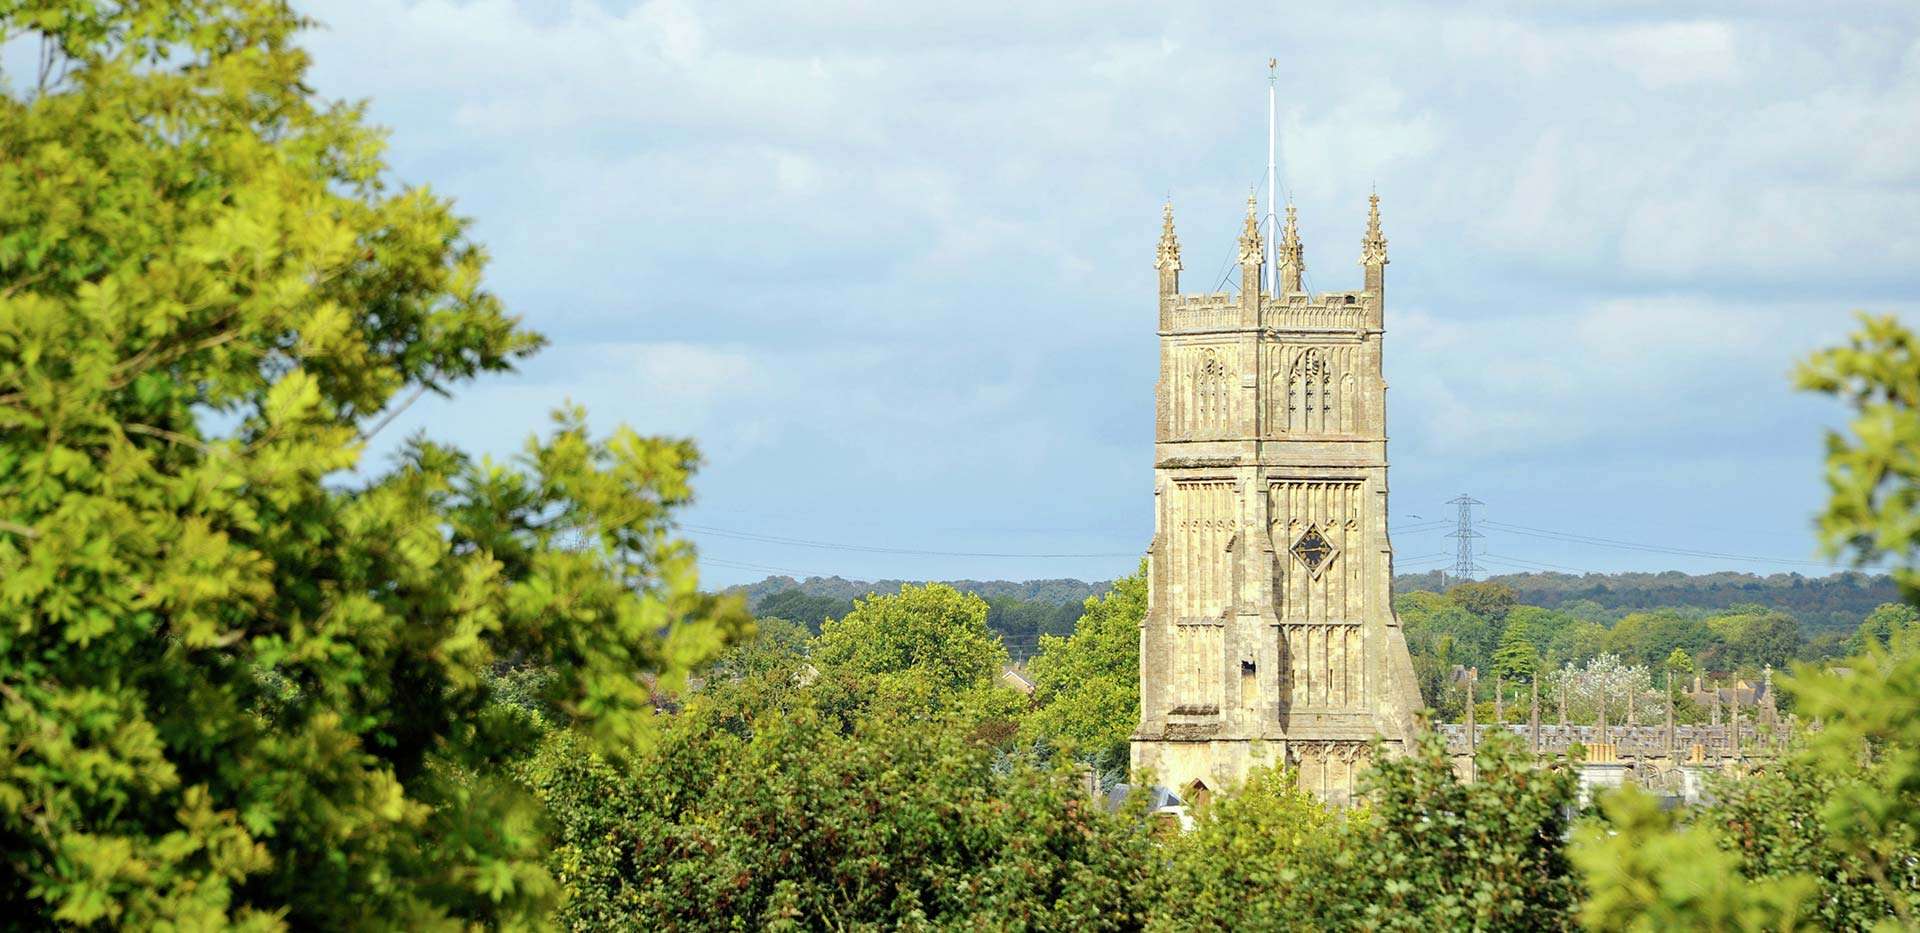 Berkeley, Kingshill Meadow, Cirencester, Local Area, Cathedral